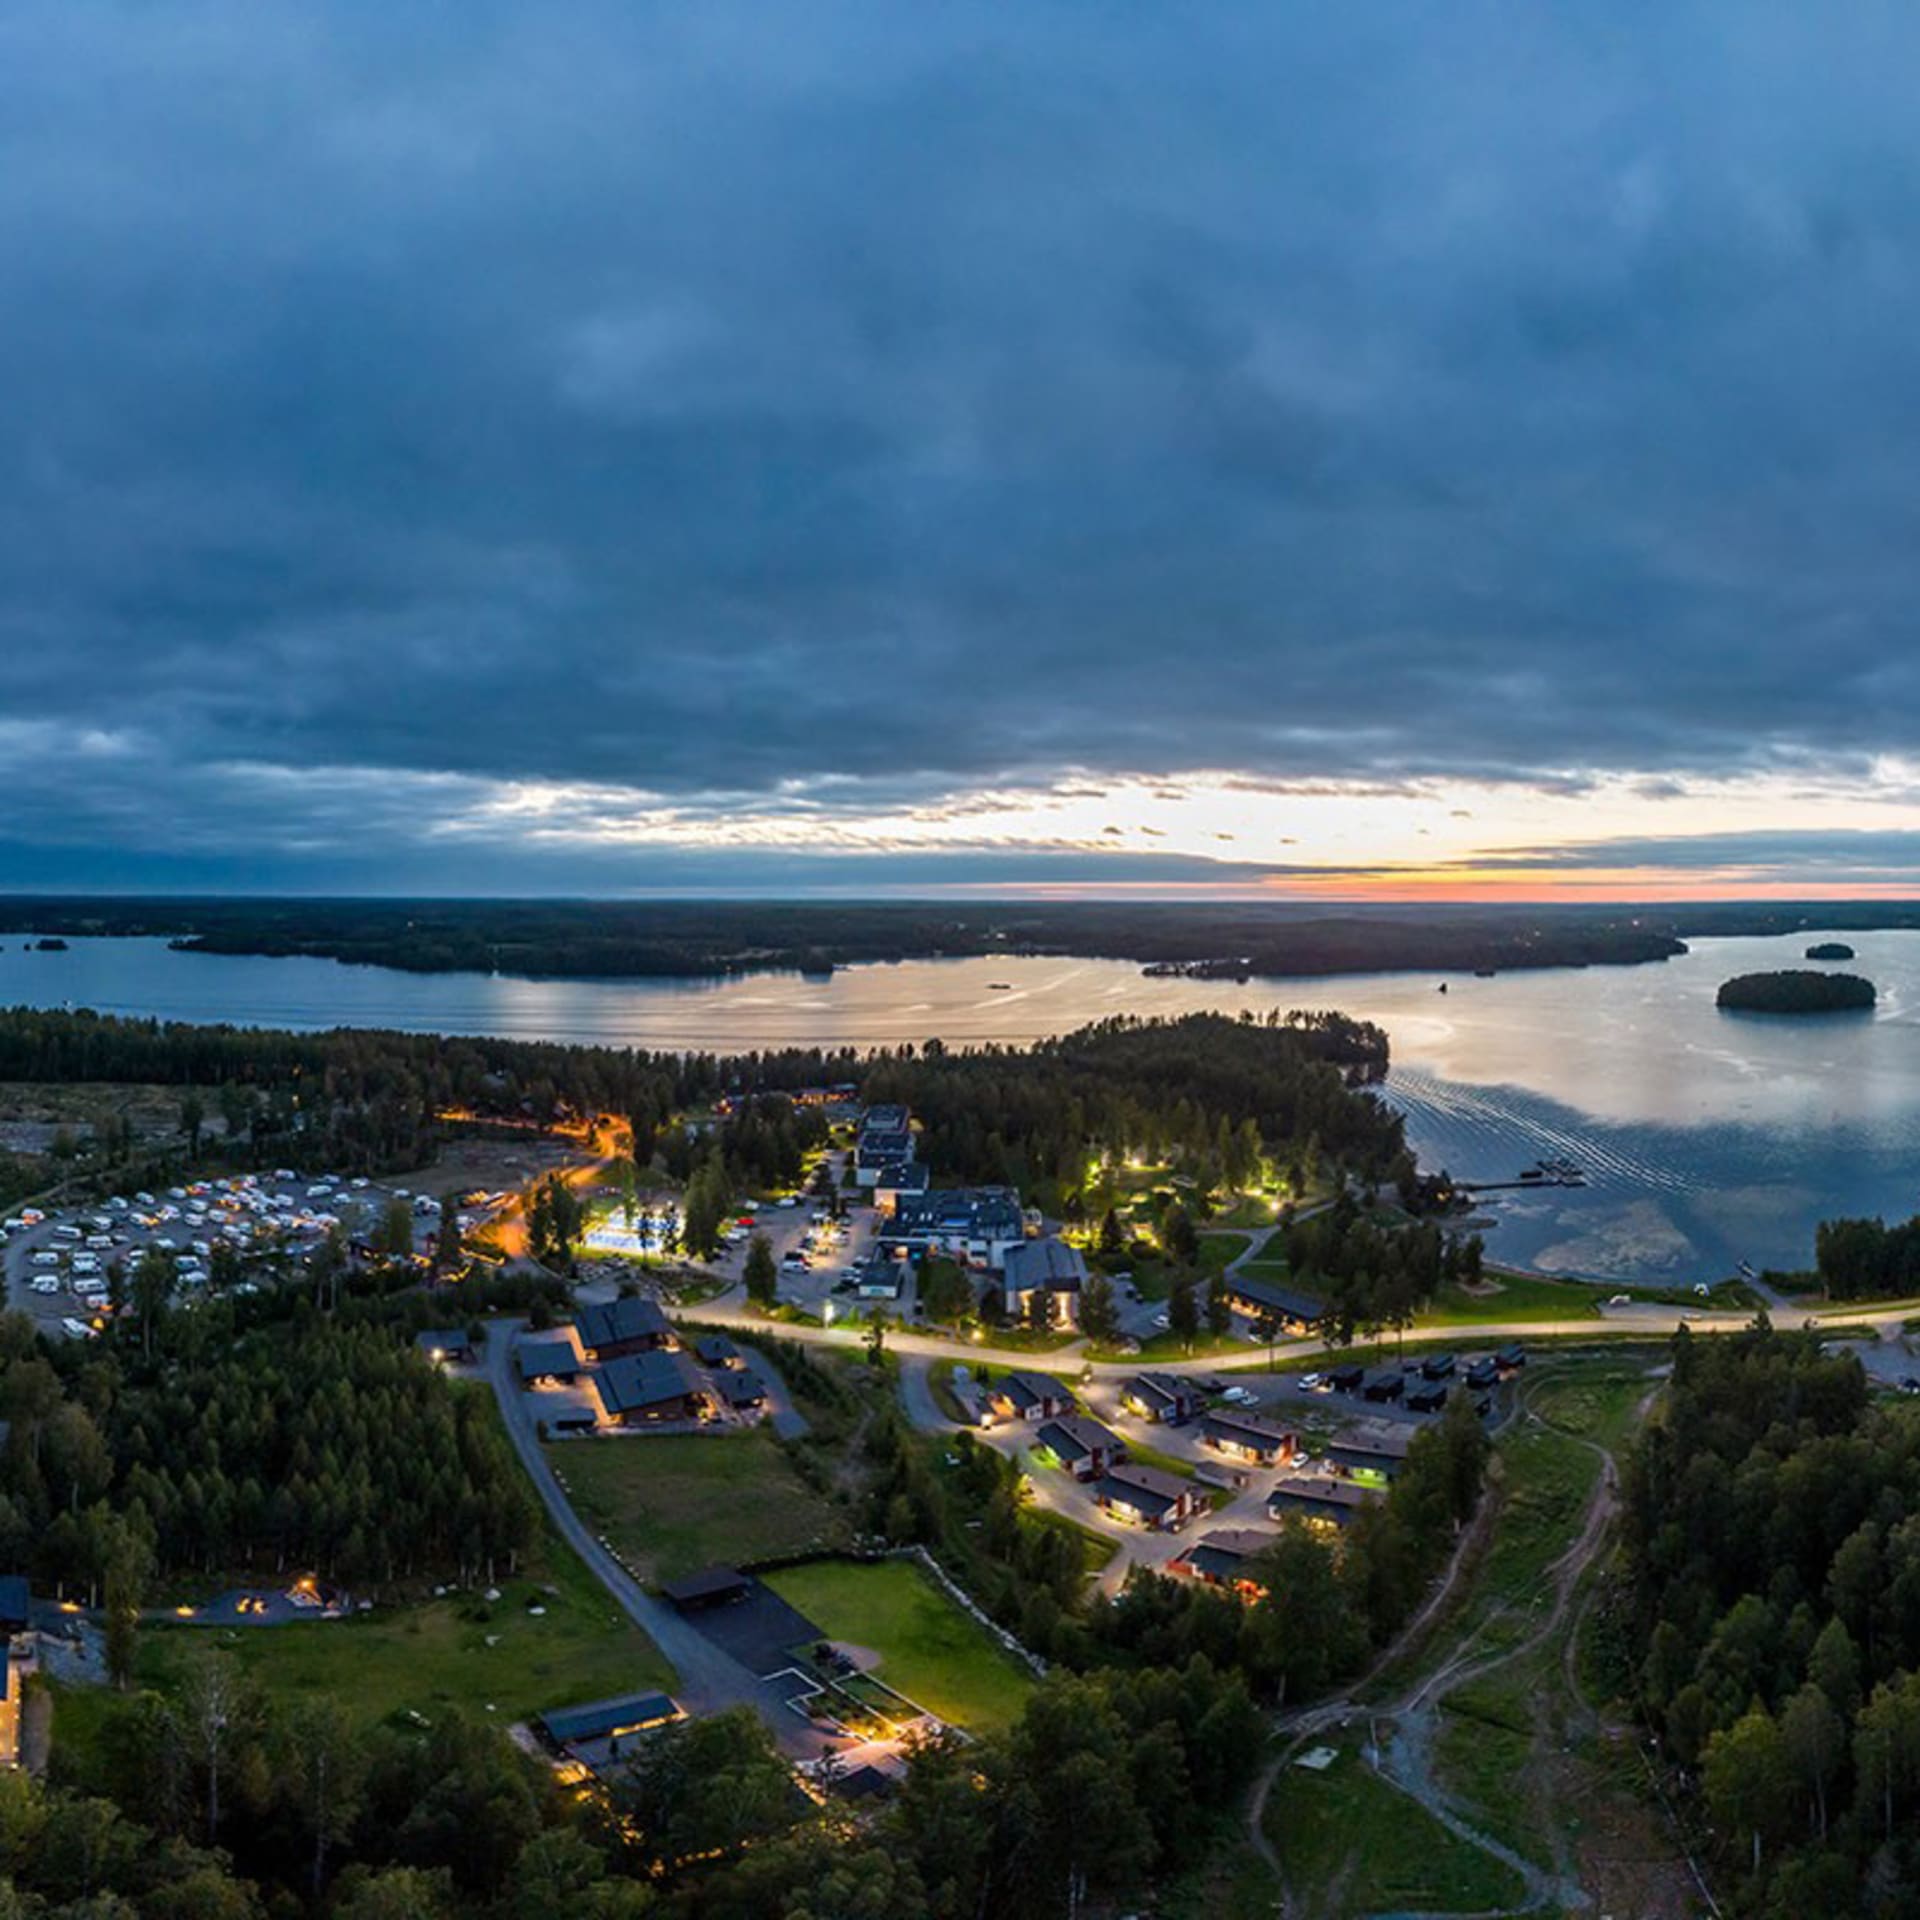 Ellivuori Resort is located about 40 minutes from Tampere.